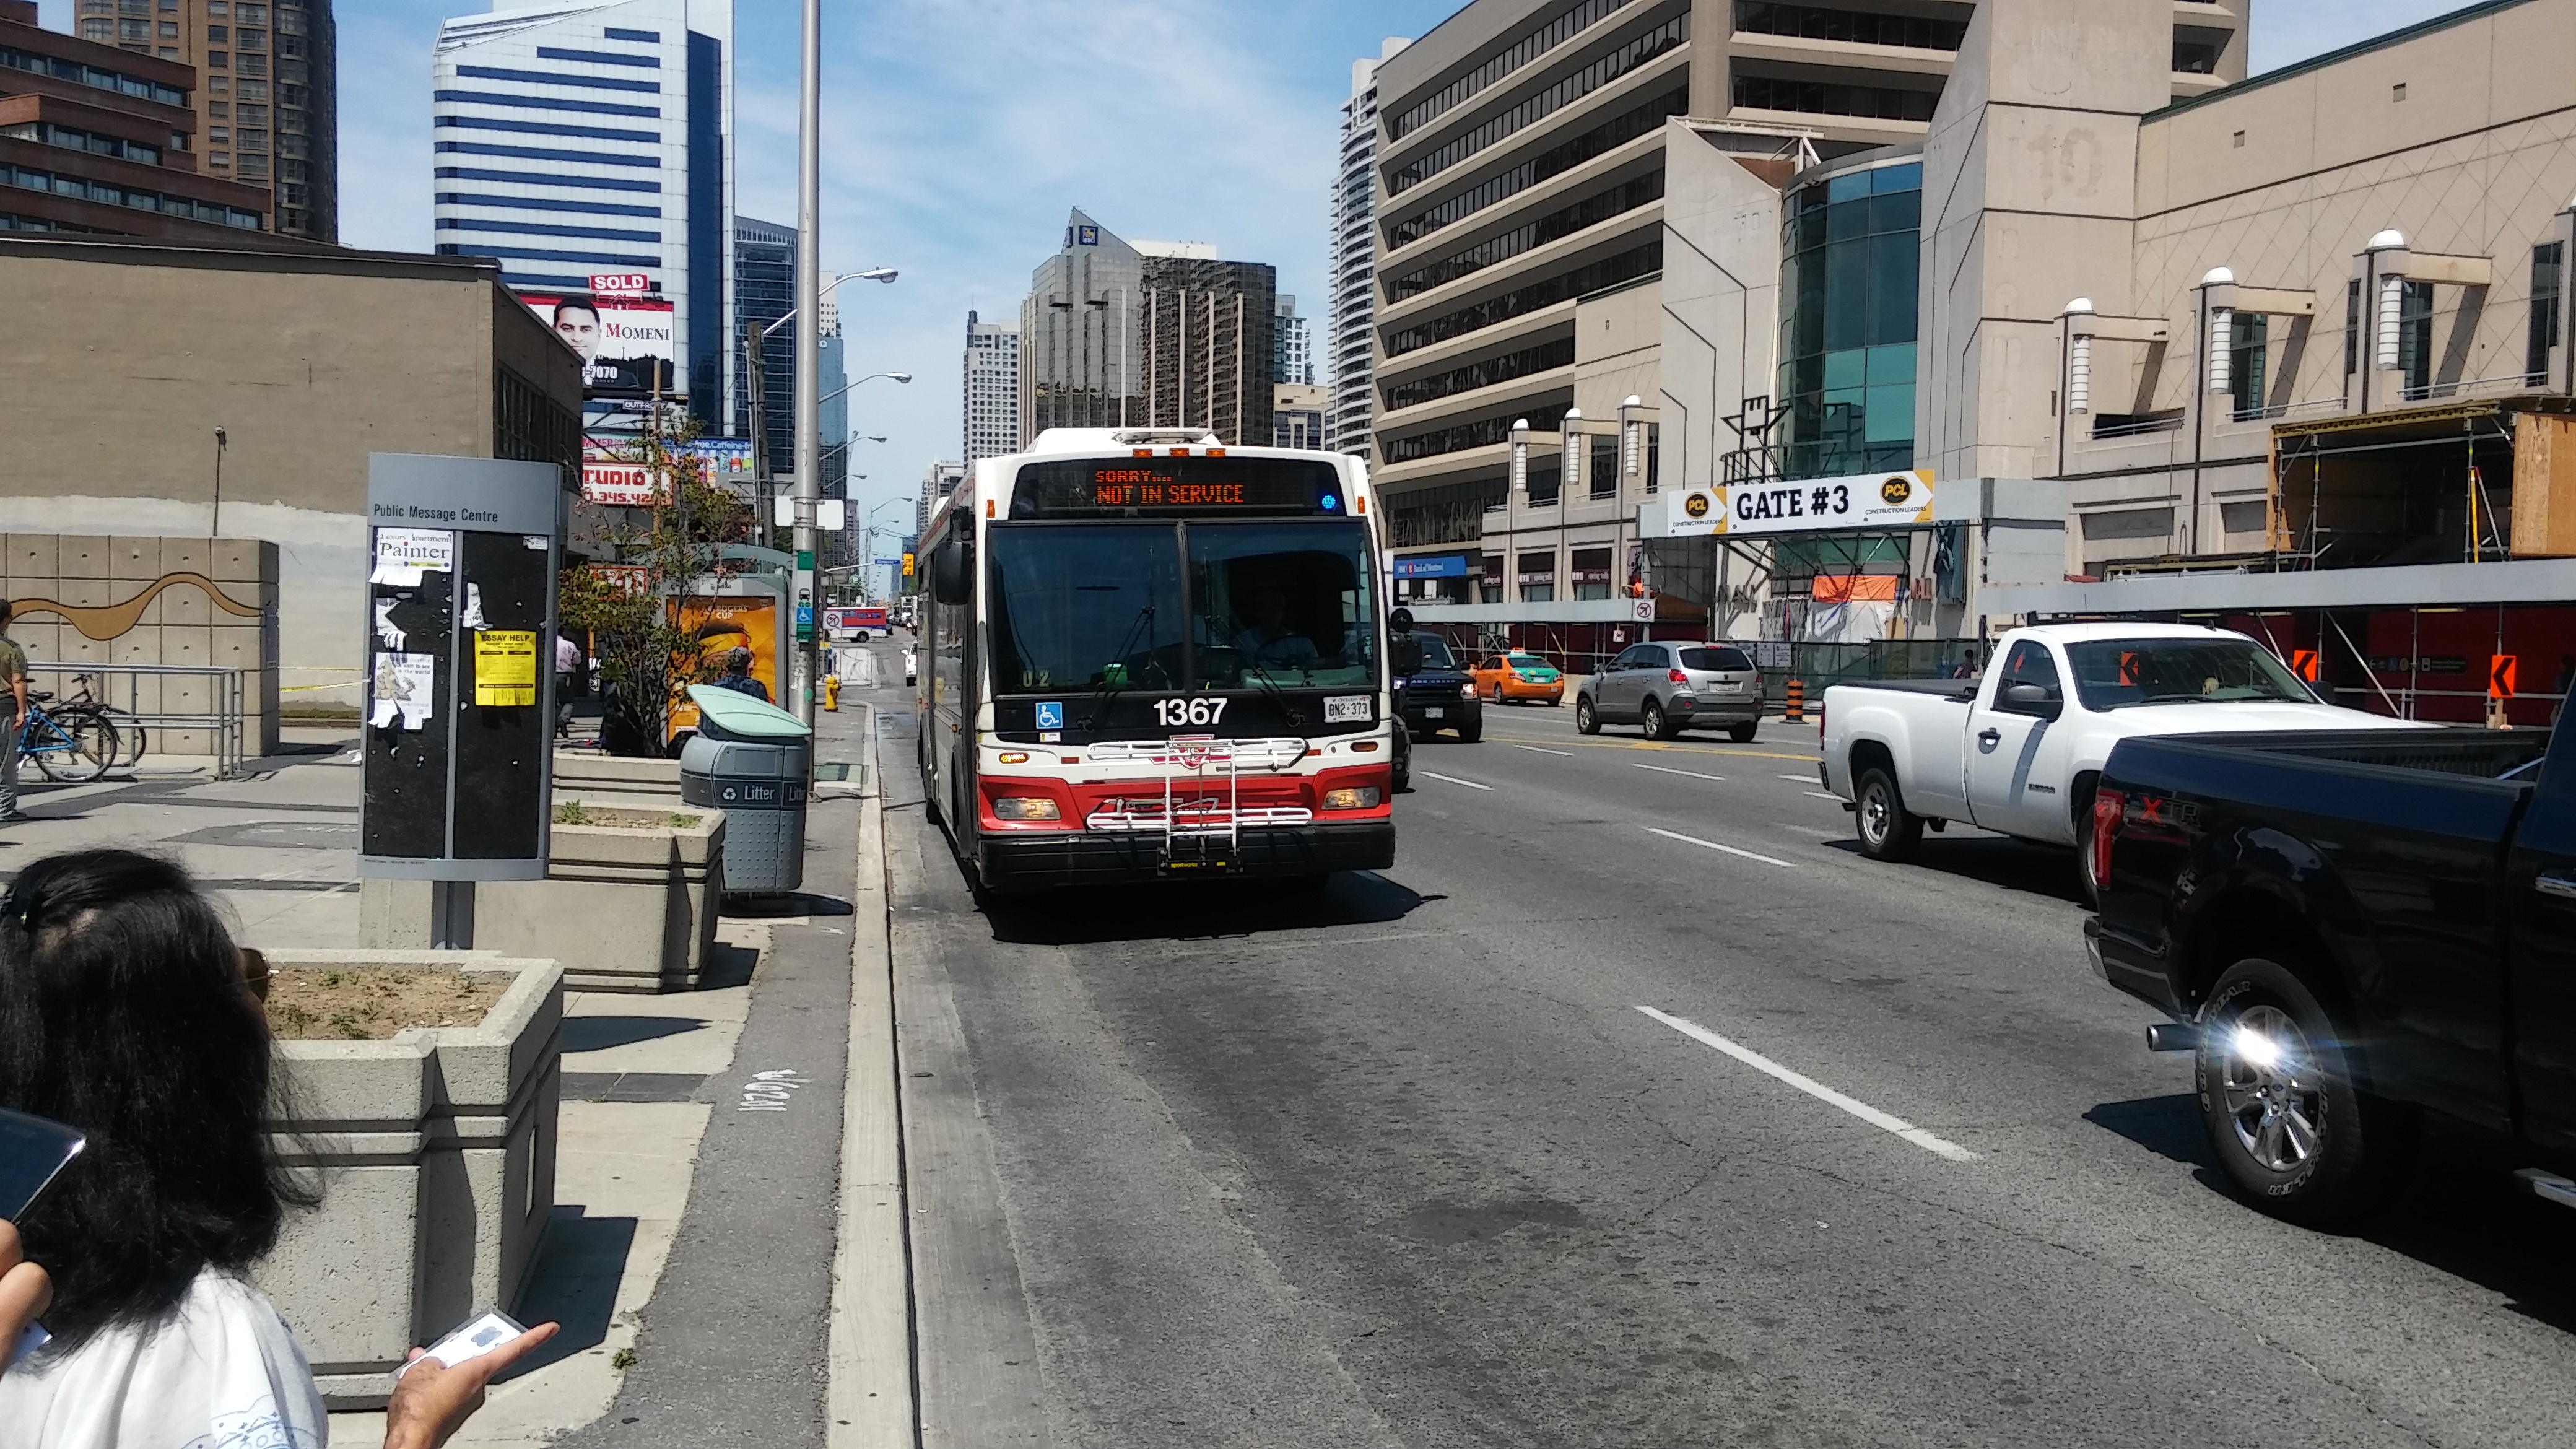 here is another photo of one of the buses that passed us by that read Out Of Service.

this is ridiculous when more than 20 customers were waiting for the bus to go Southbound on Yonge Street earlier 